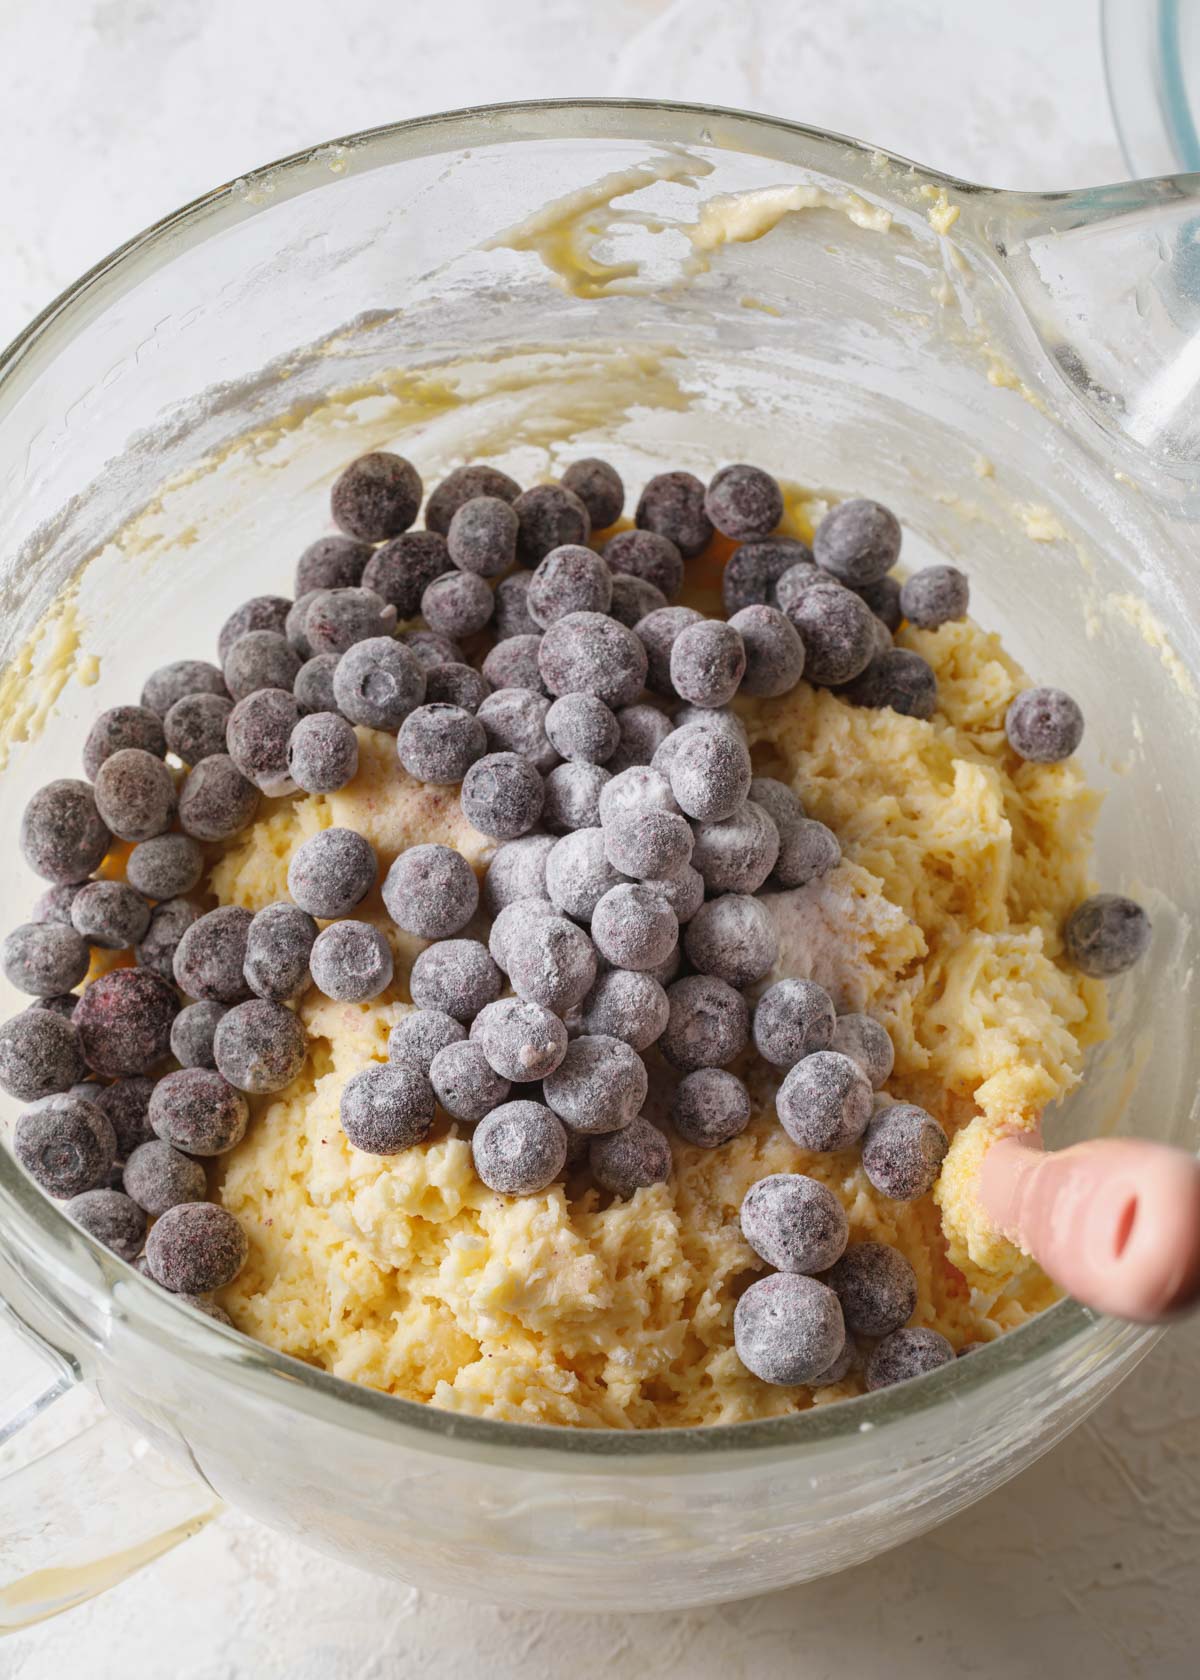 Blueberries tossed in flour being added to cake batter